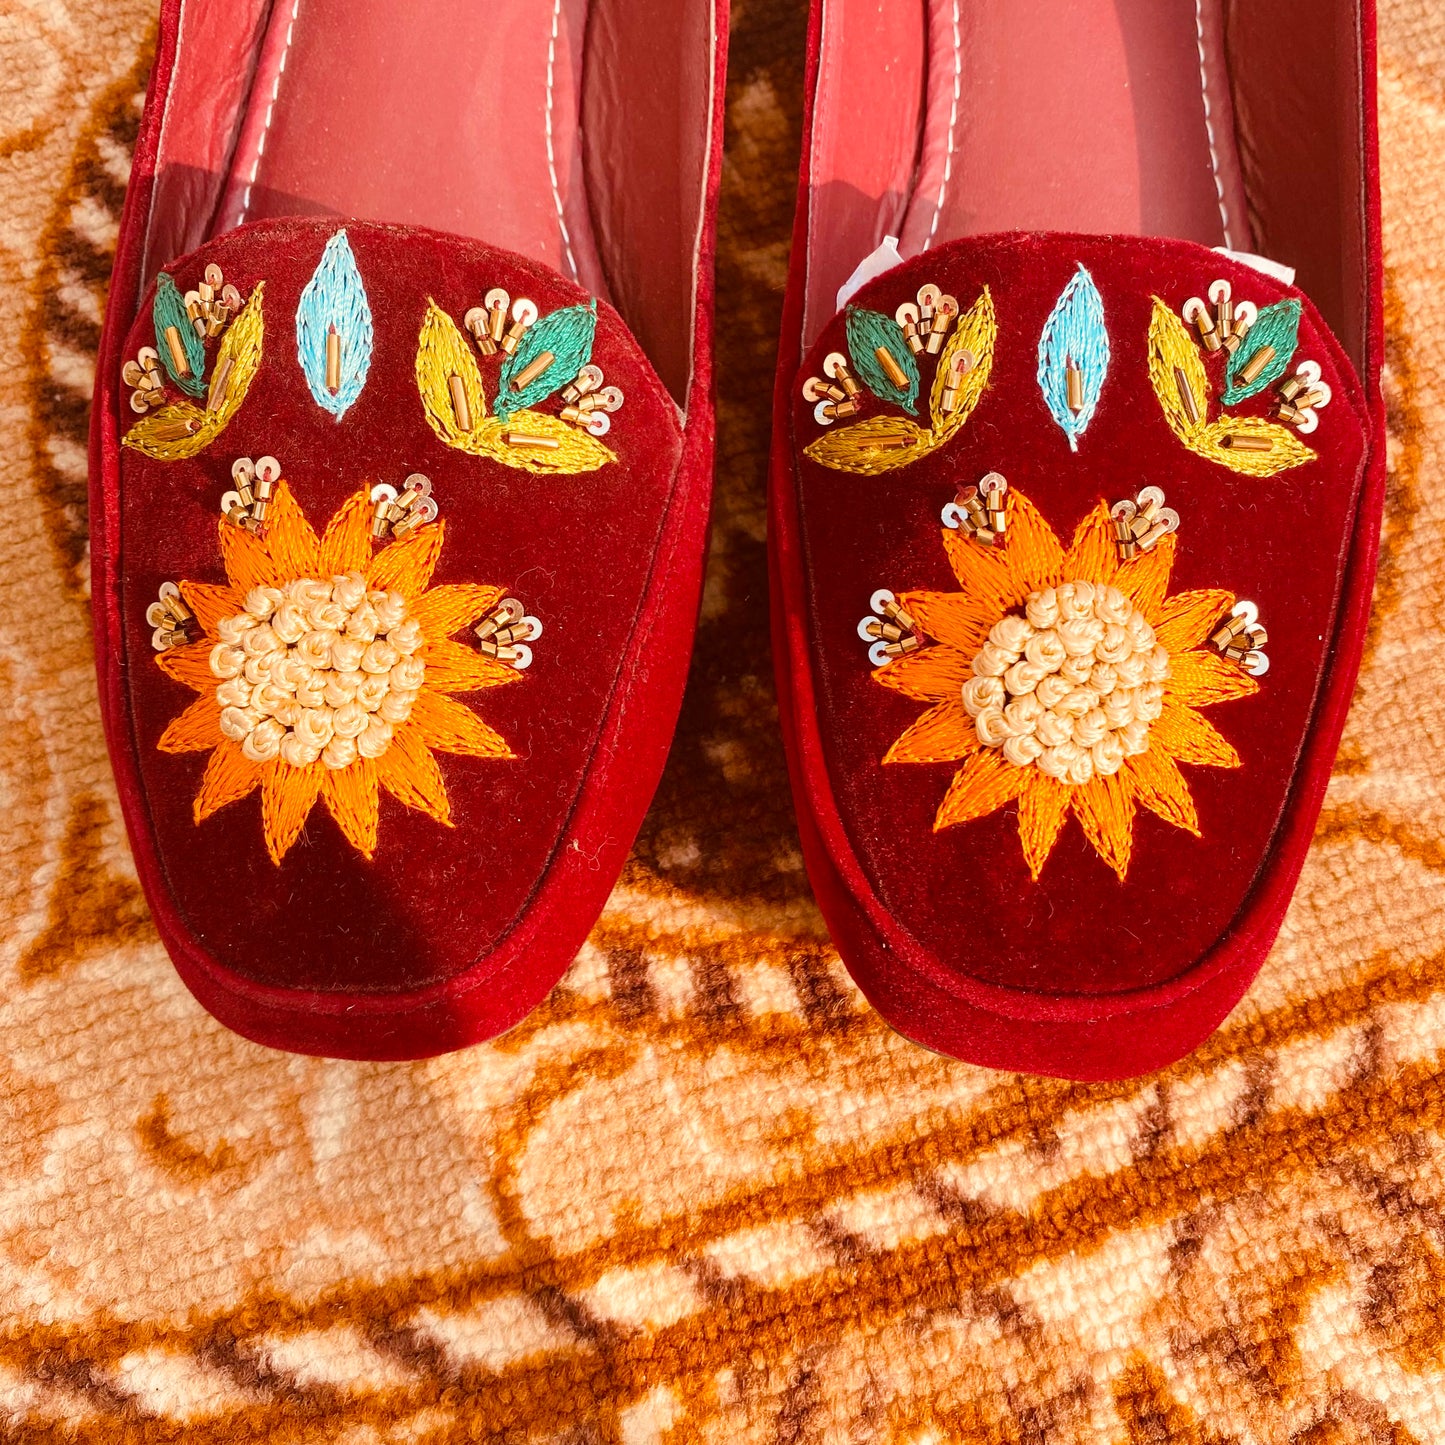 Velvet Flat Pumps Shoes with Beautiful Multi Embroidery